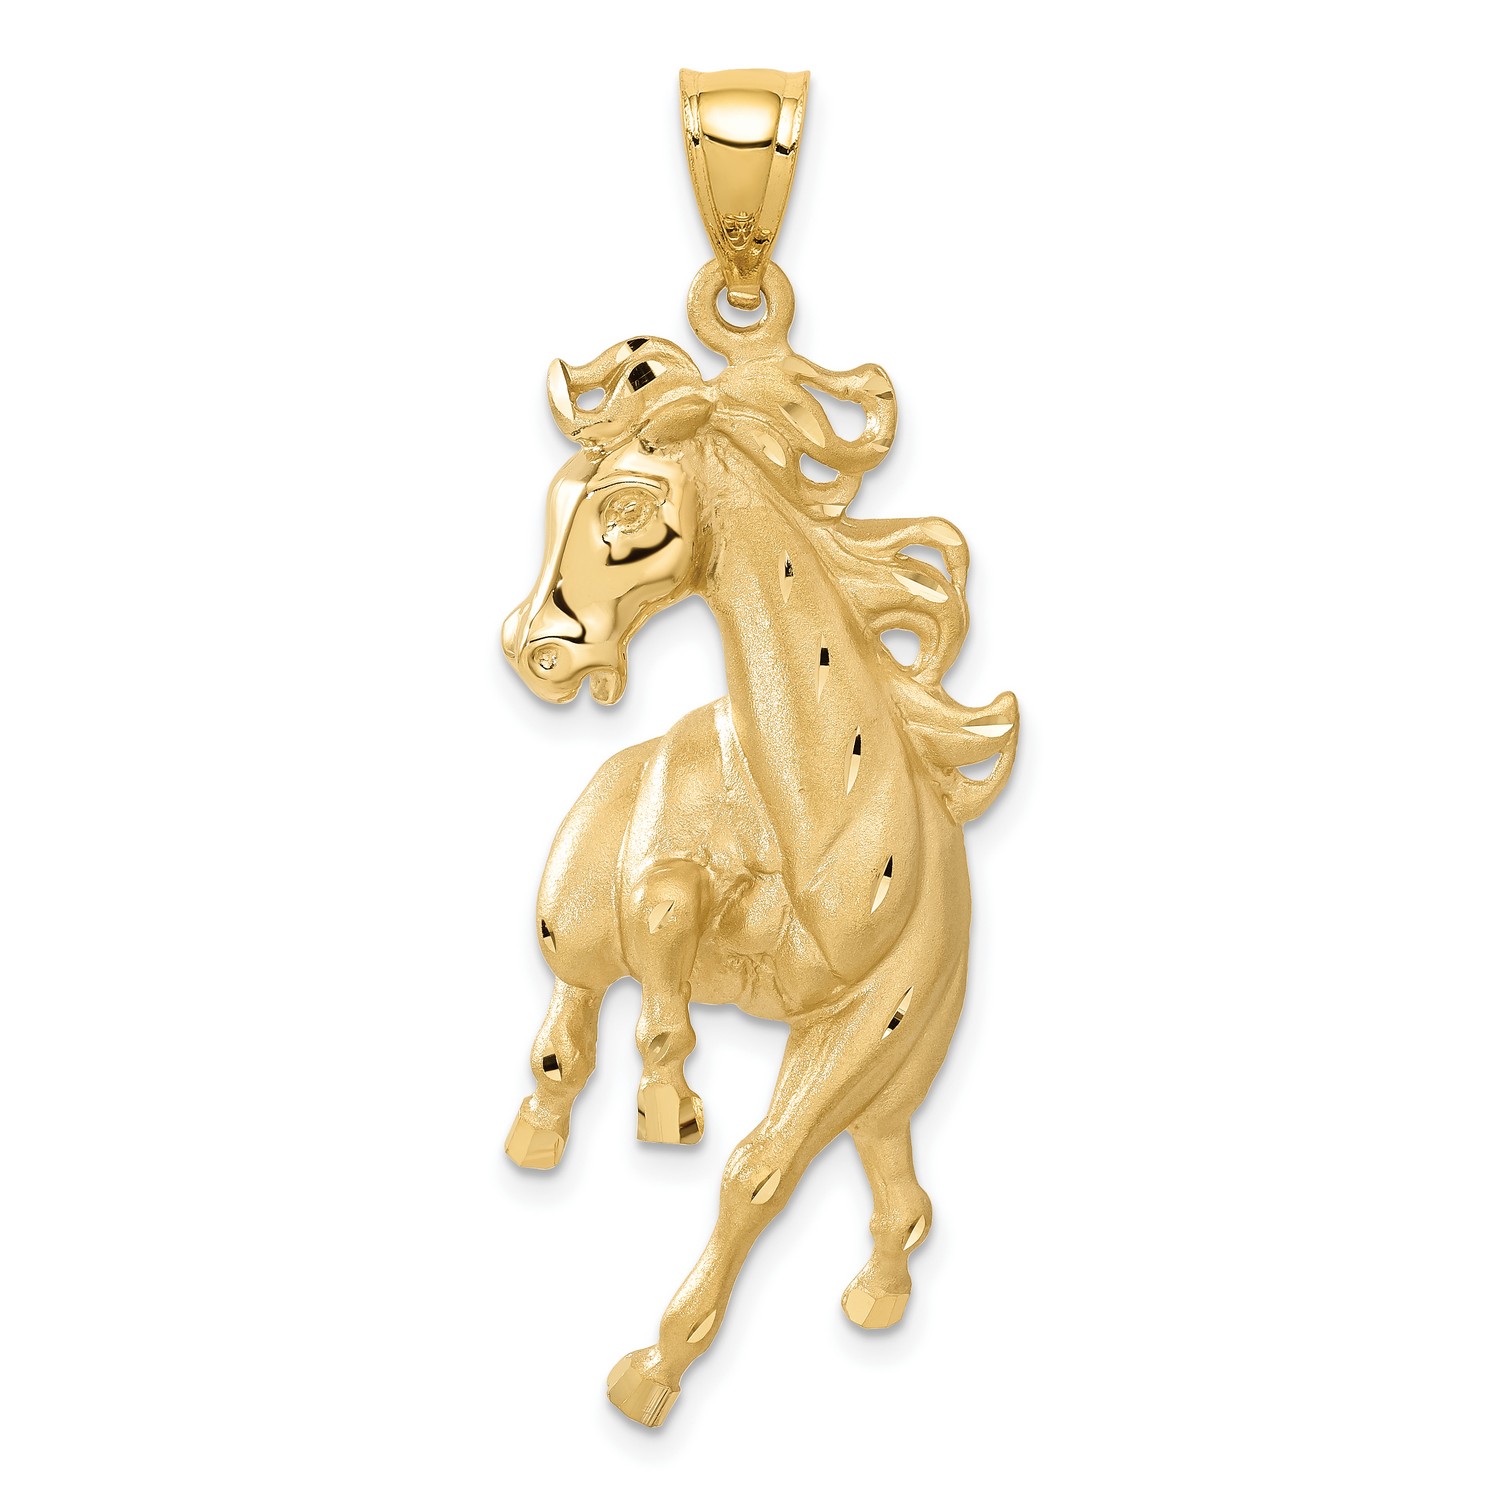 Pre-owned Jewelry Stores Network 14k Yellow Gold Horse With Leg In Air Charm Pendant